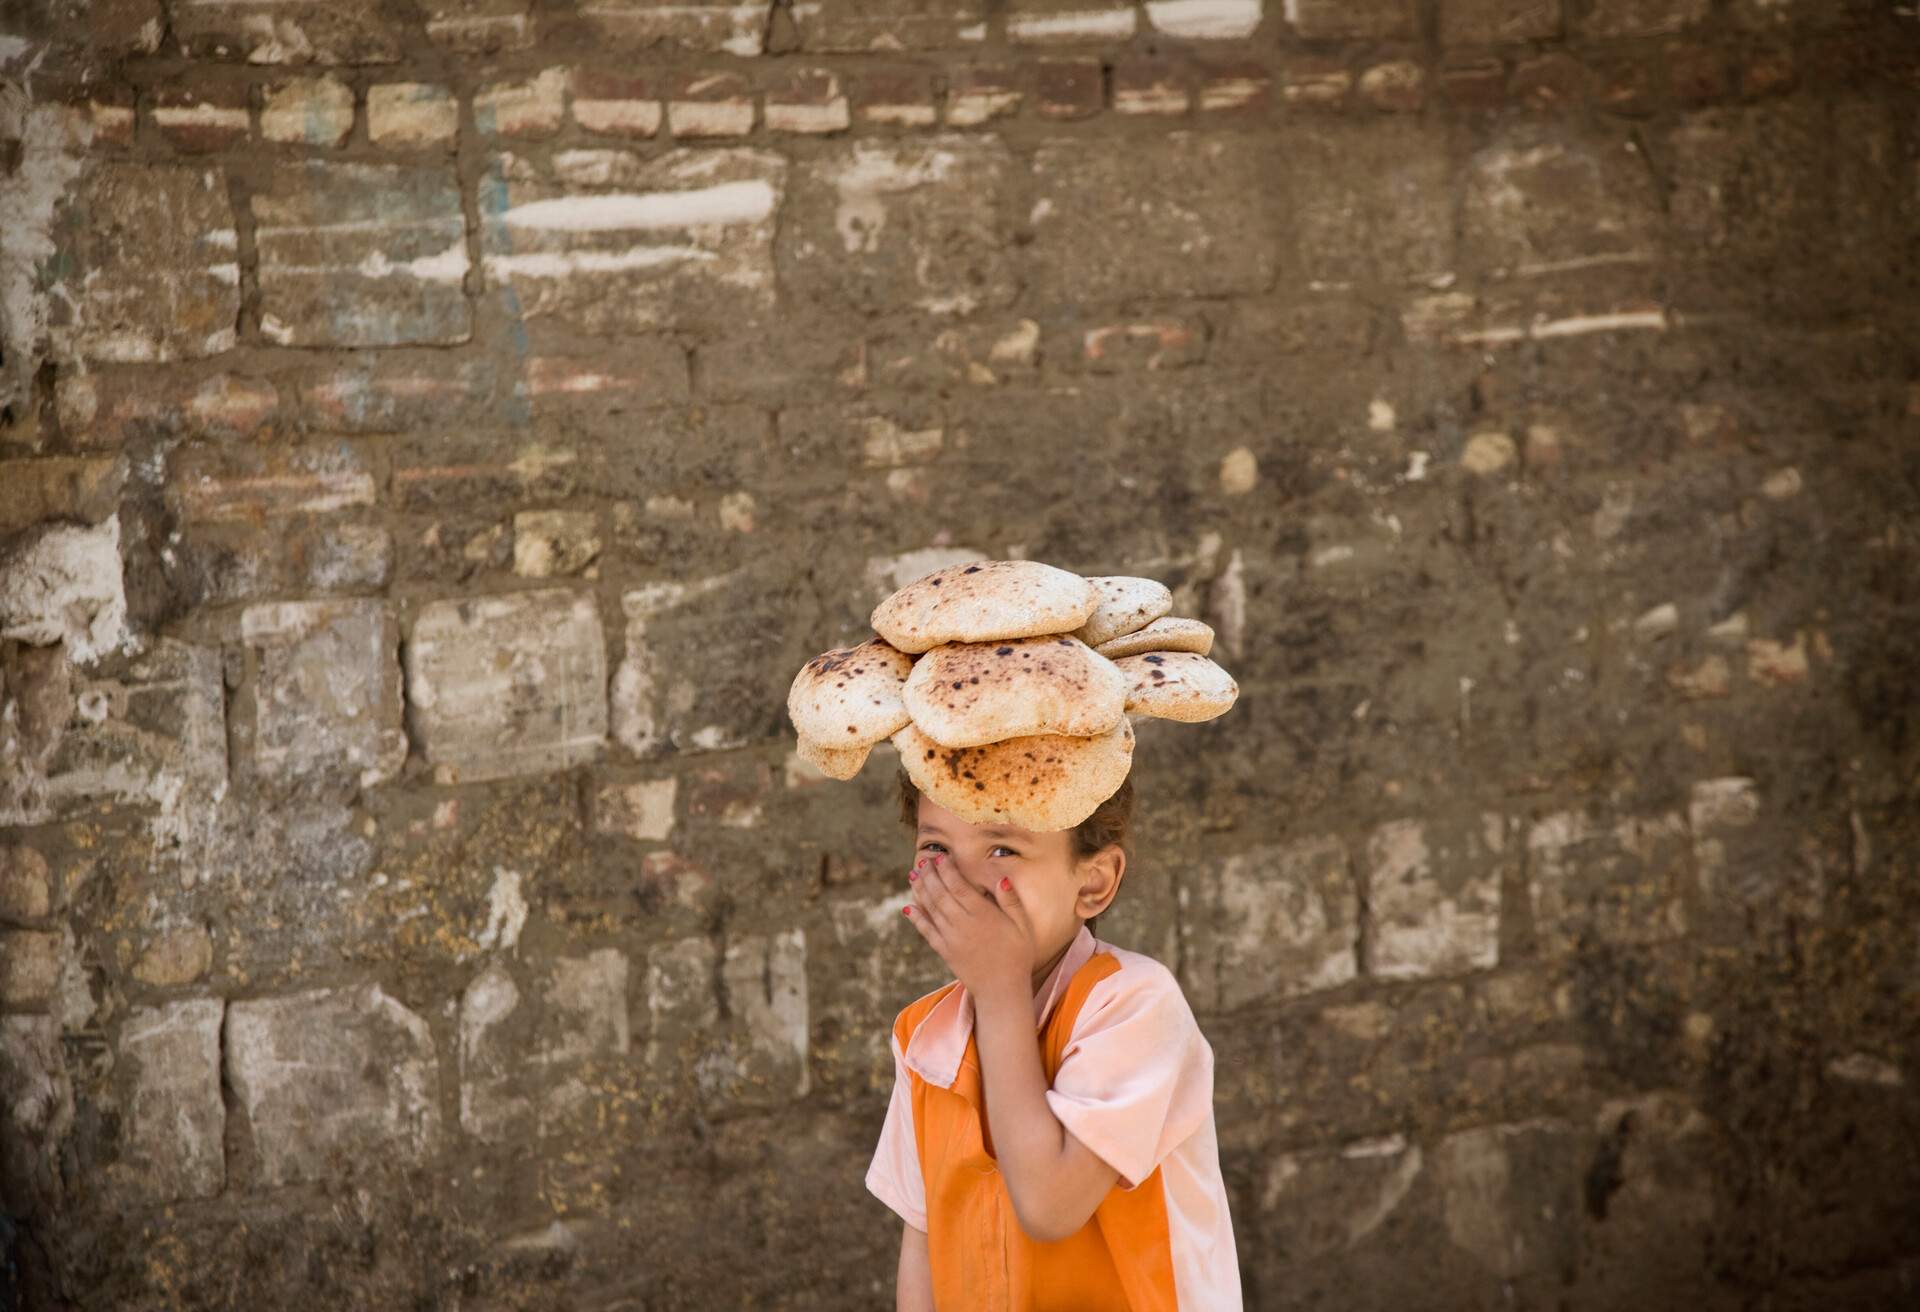 EGYPT_CAIRO_KID_WITH_BREAD_ON_HER_HEAD